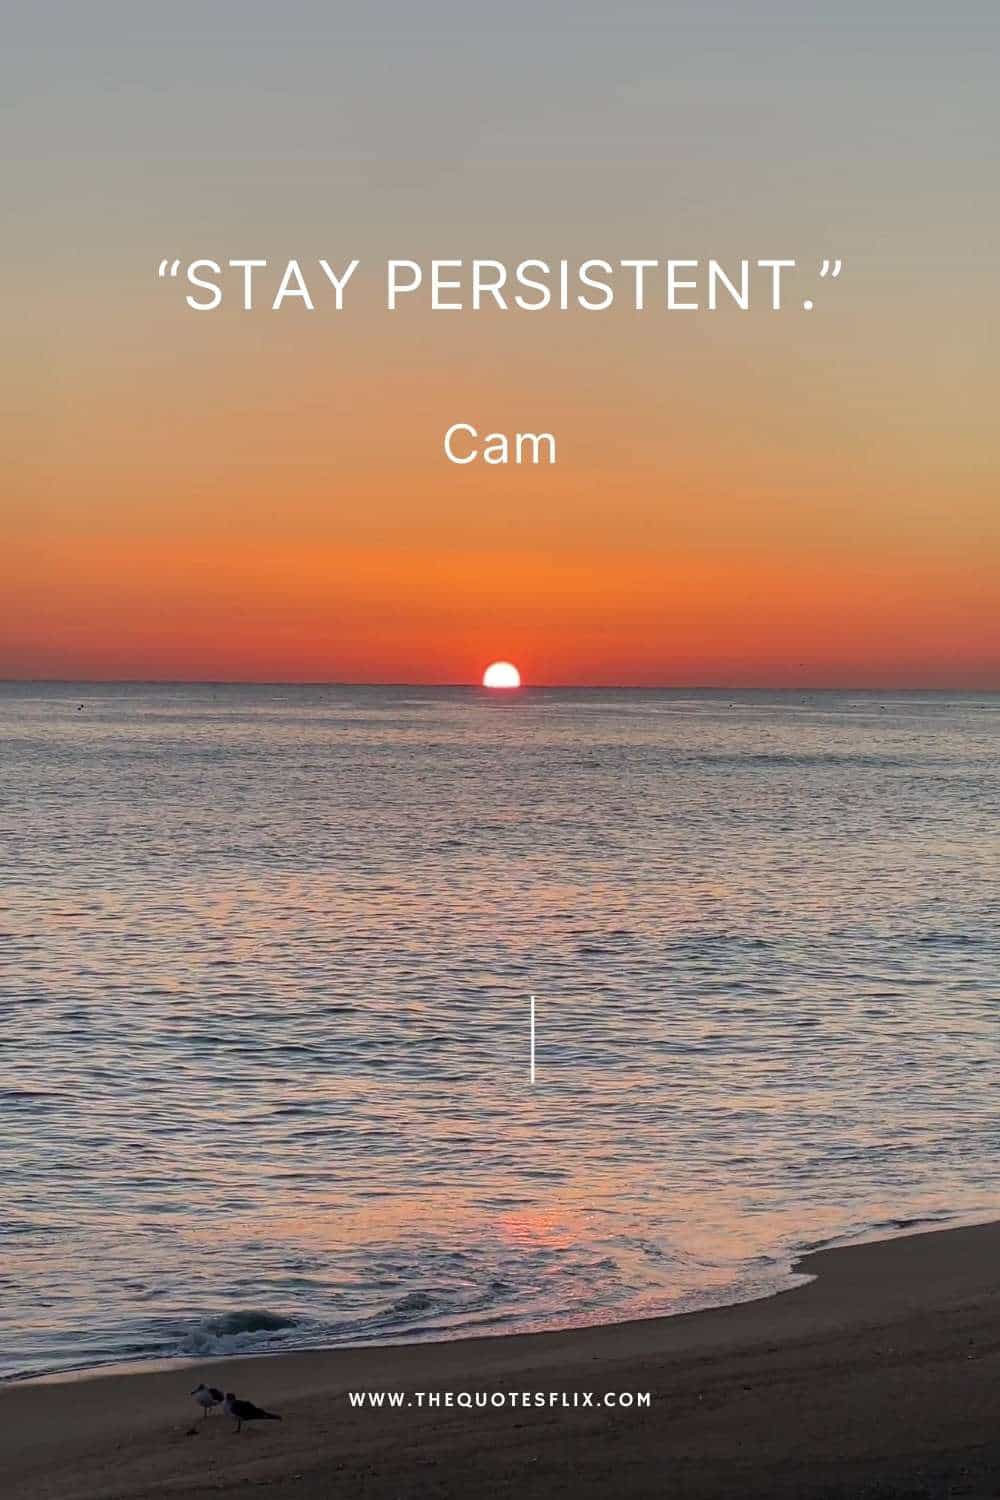 inspiratioinal cancer quotes - stay persistent